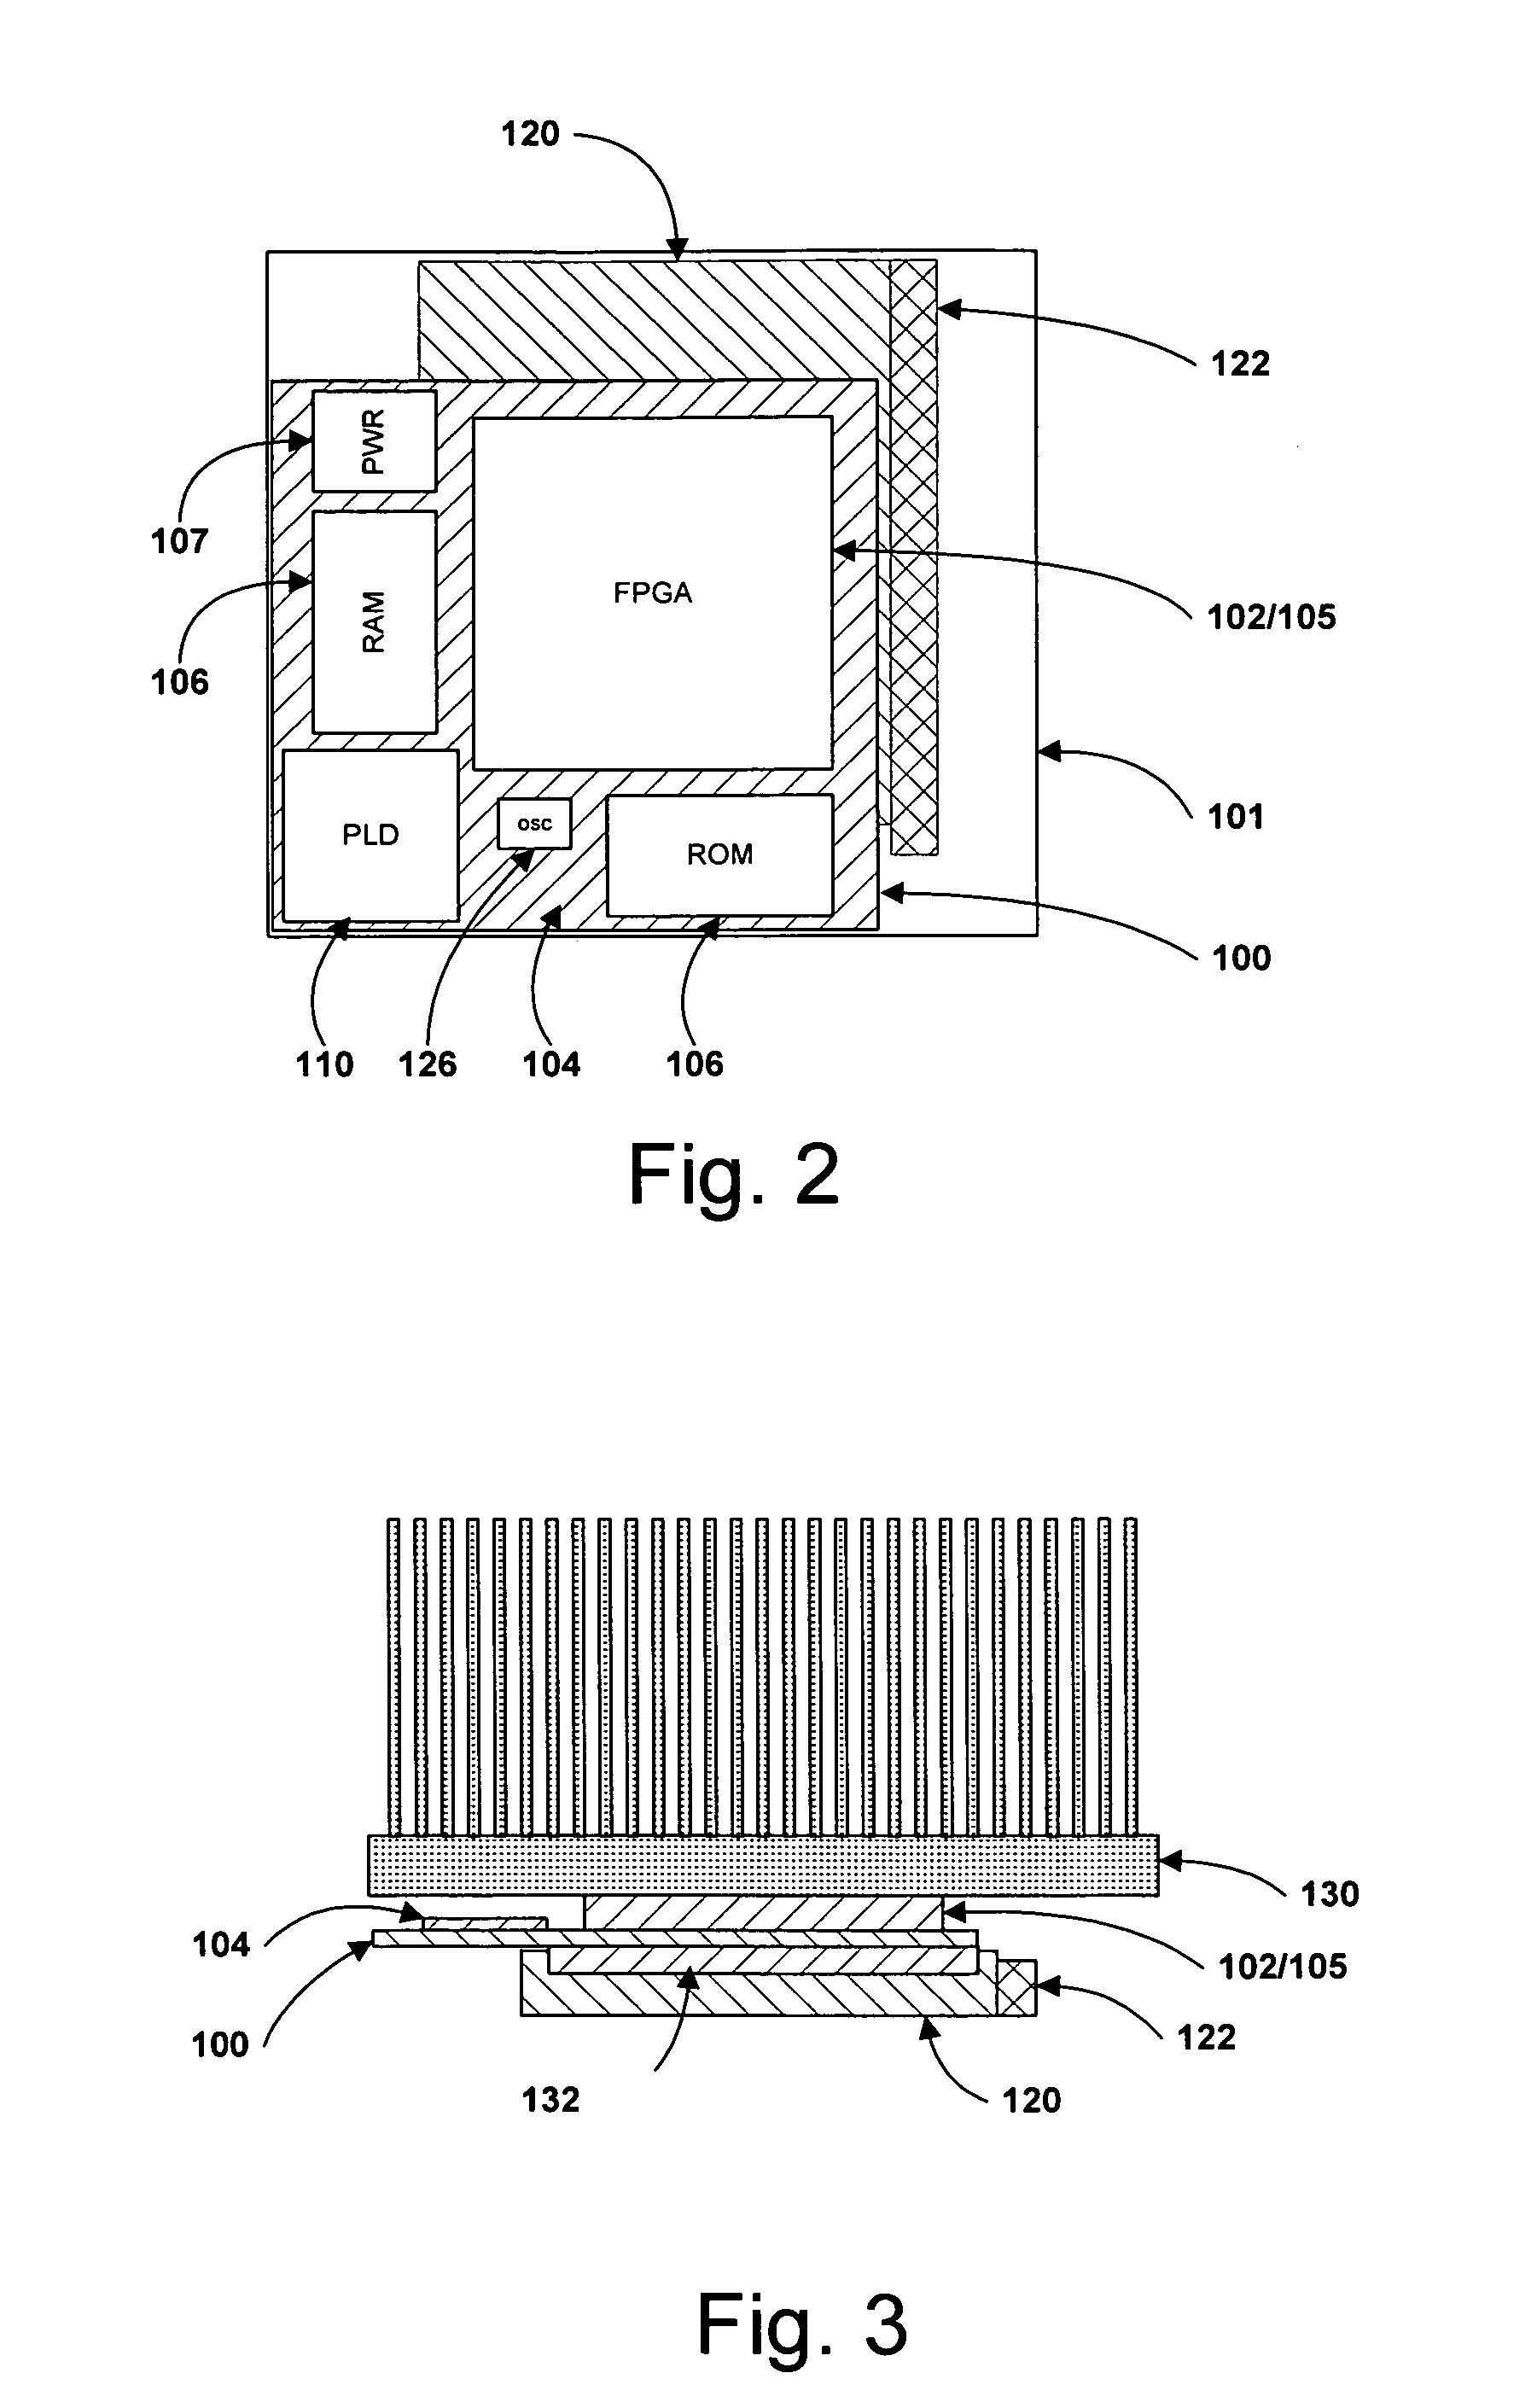 Systems and methods for providing co-processors to computing systems